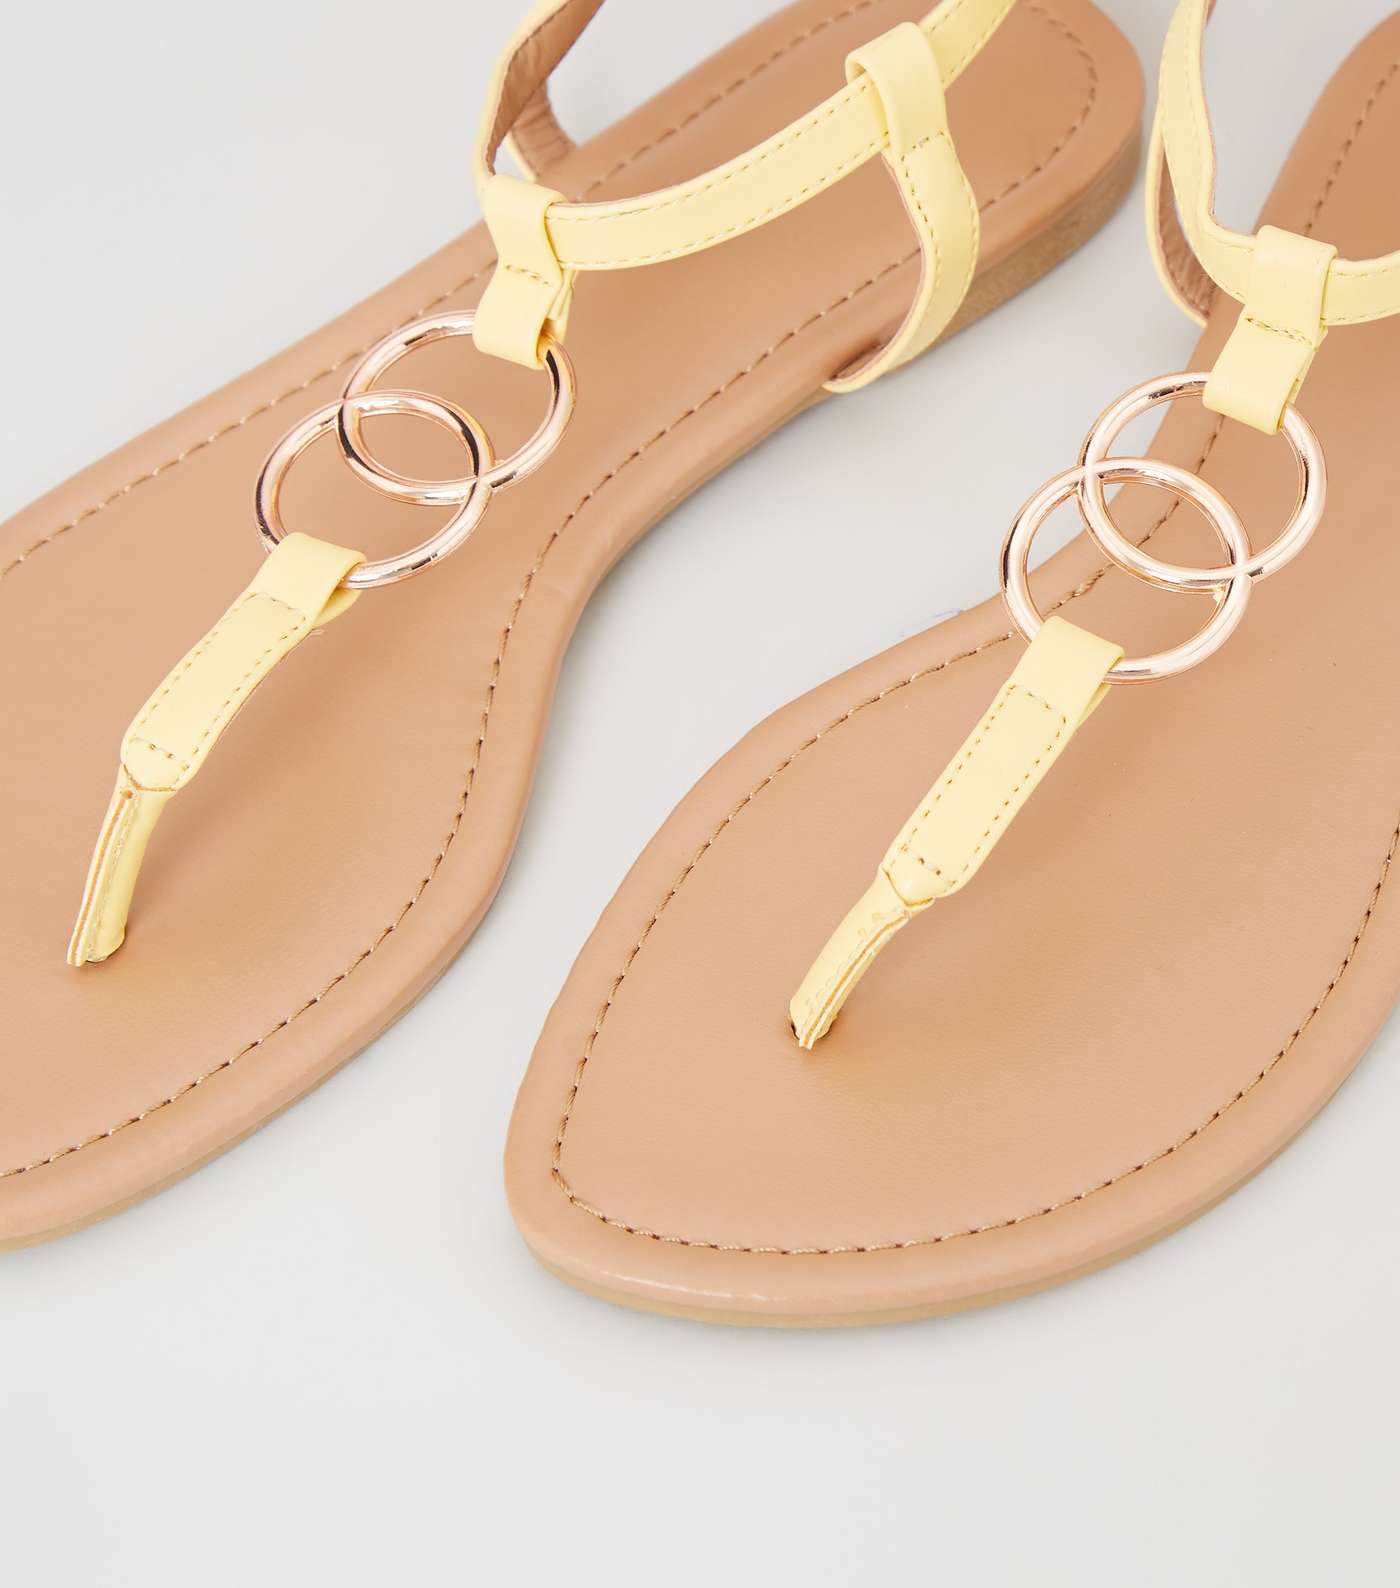 Pale Yellow Ring Strap Flat Sandals Image 4